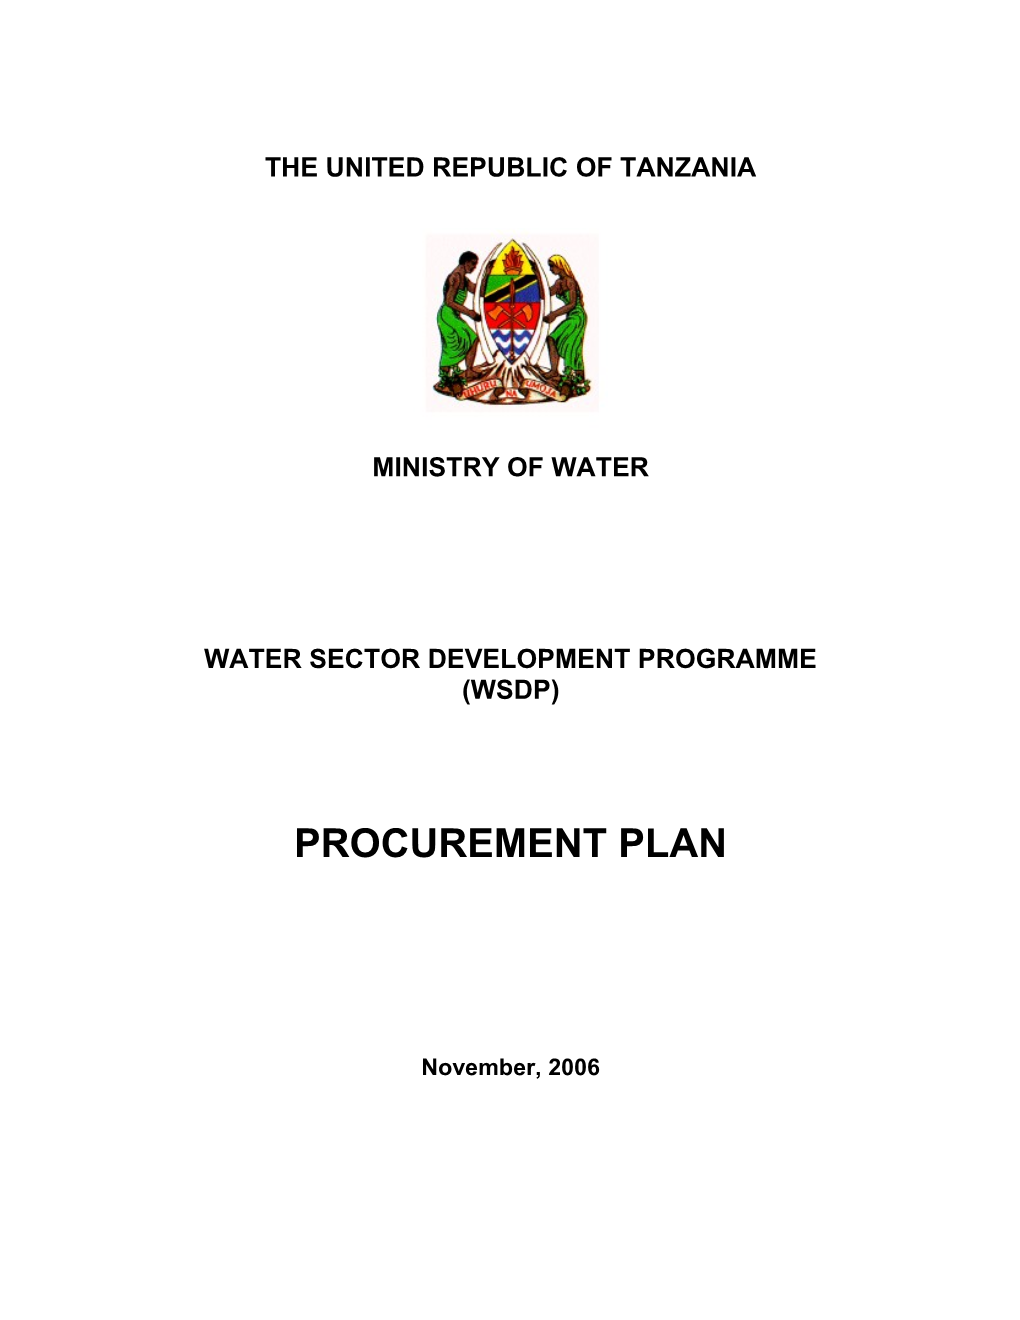 Details of the Procurement Plan Involving ICB & Other Methods(First 1.5 Years)